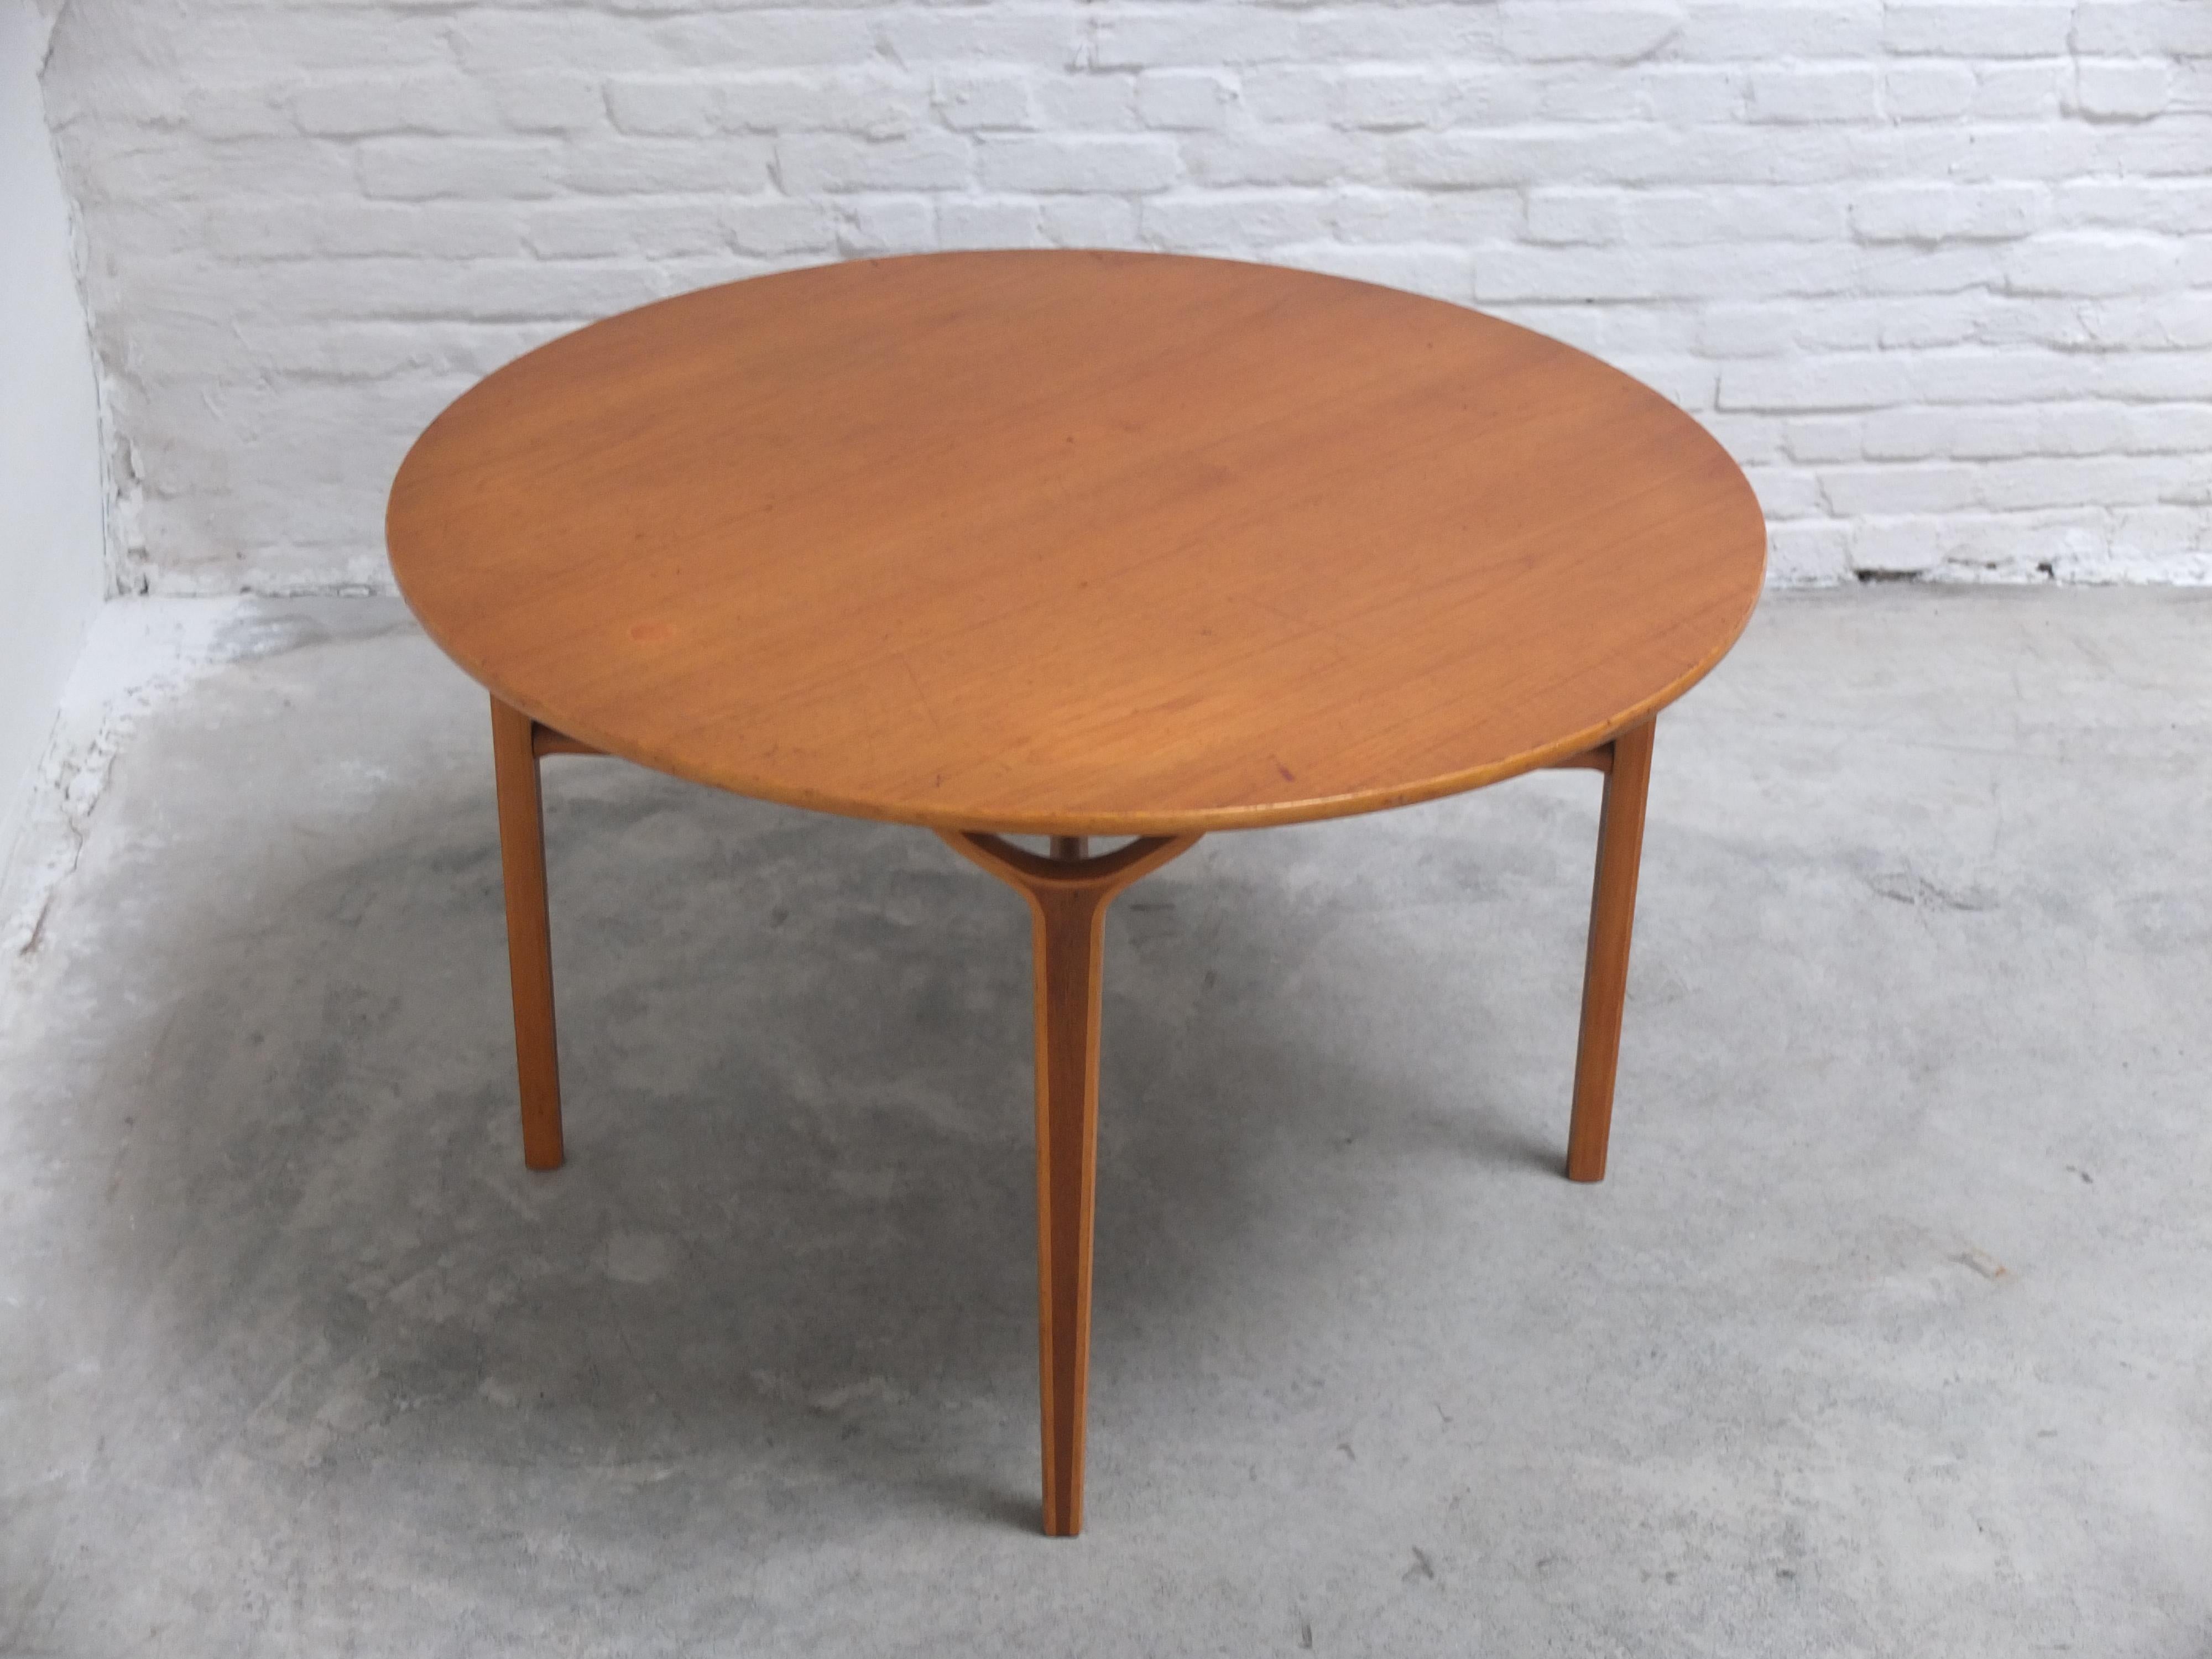 Rare 'AX' Coffee Table by Peter Hvidt & Orla Mølgaard for Fritz Hansen, 1951 For Sale 3